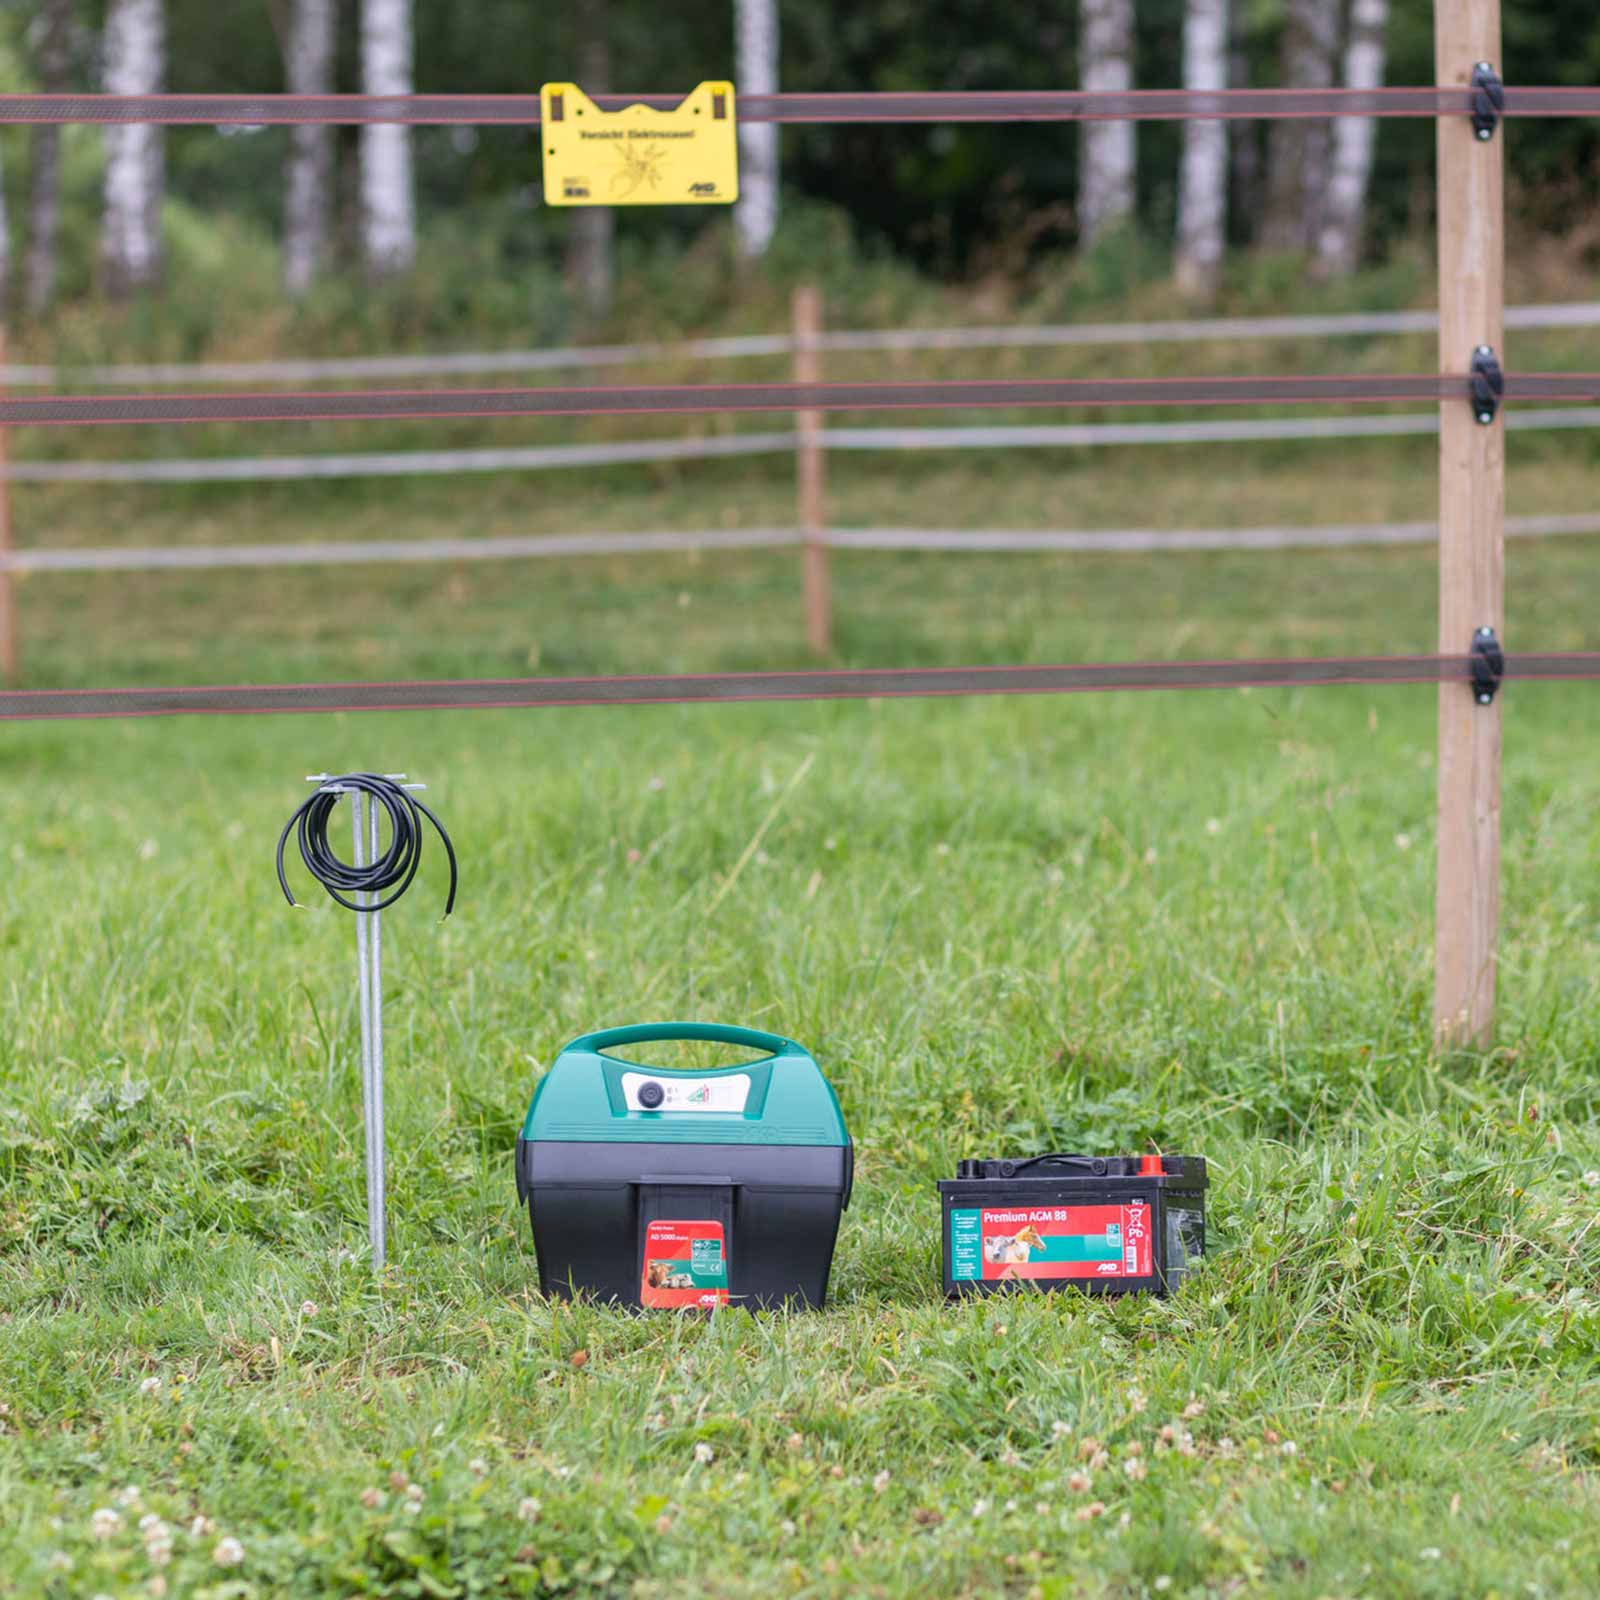 AKO Mobile Power AD 5000 electric fence energiser 12v, 7,4 joule